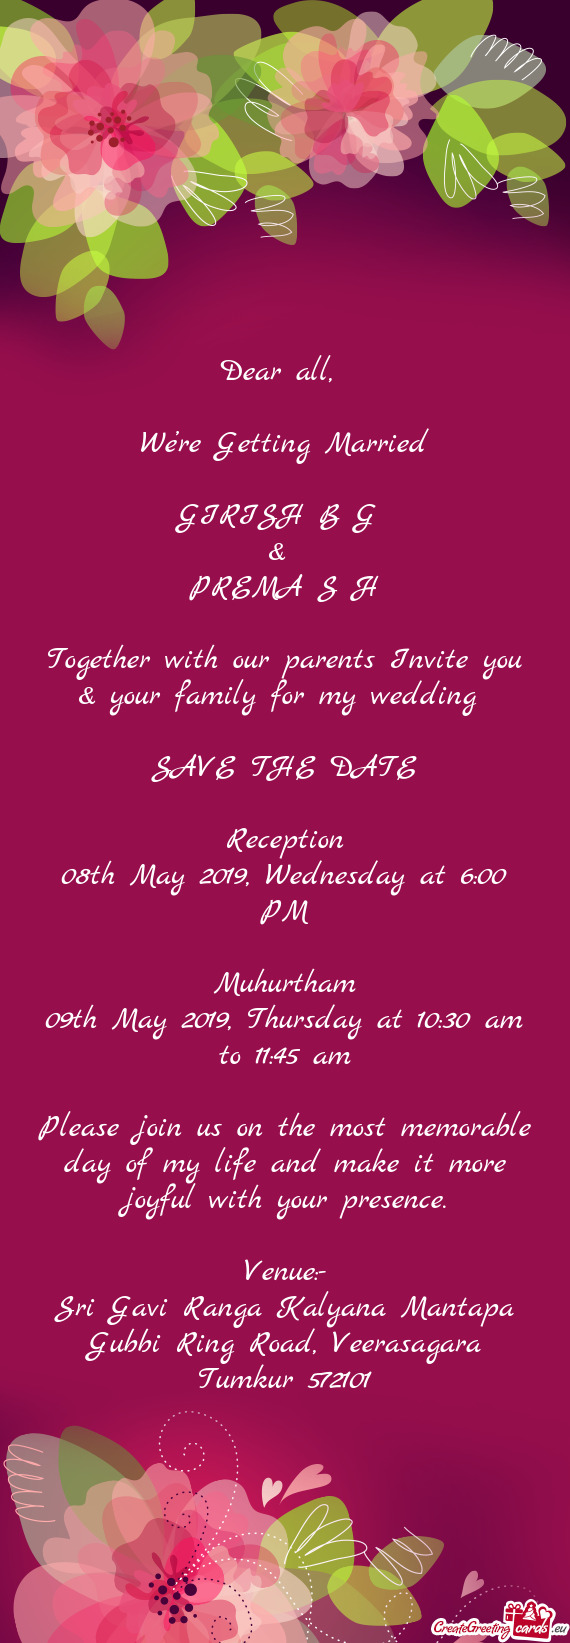 Together with our parents Invite you & your family for my wedding 